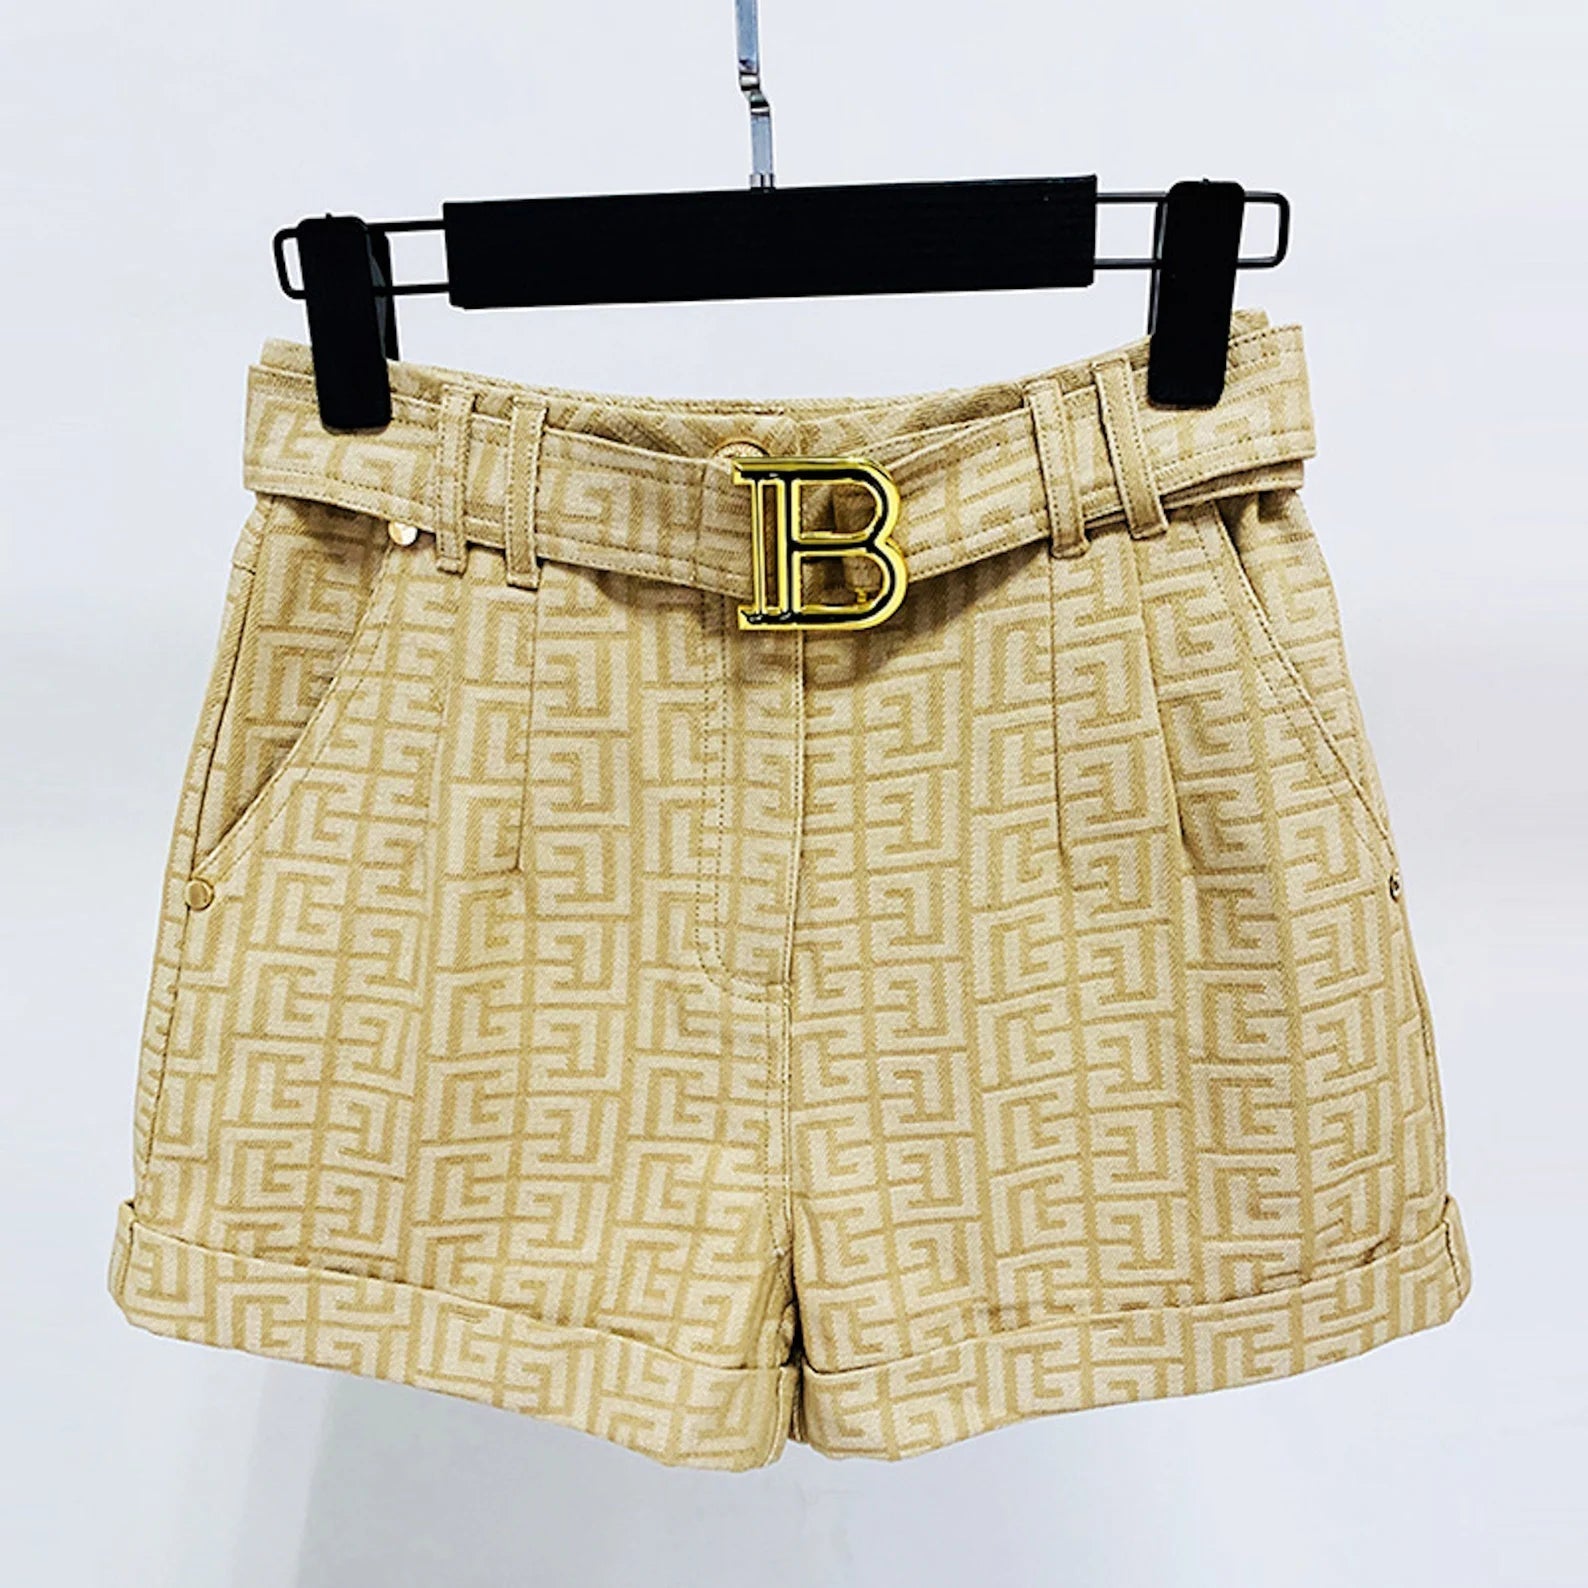 High Waist Belted Maze Pattern Shorts Black colors for Ladies Shorts This High Waist Shorts is available in 4 different colours. For Holidays, Shopping, Parties, and other occasions, a basic T-shirt will complete your daily summer style. This shorts are elegant and comfy thanks to the maze pattern and belt. The high waistline slims you down and accentuates your curves.